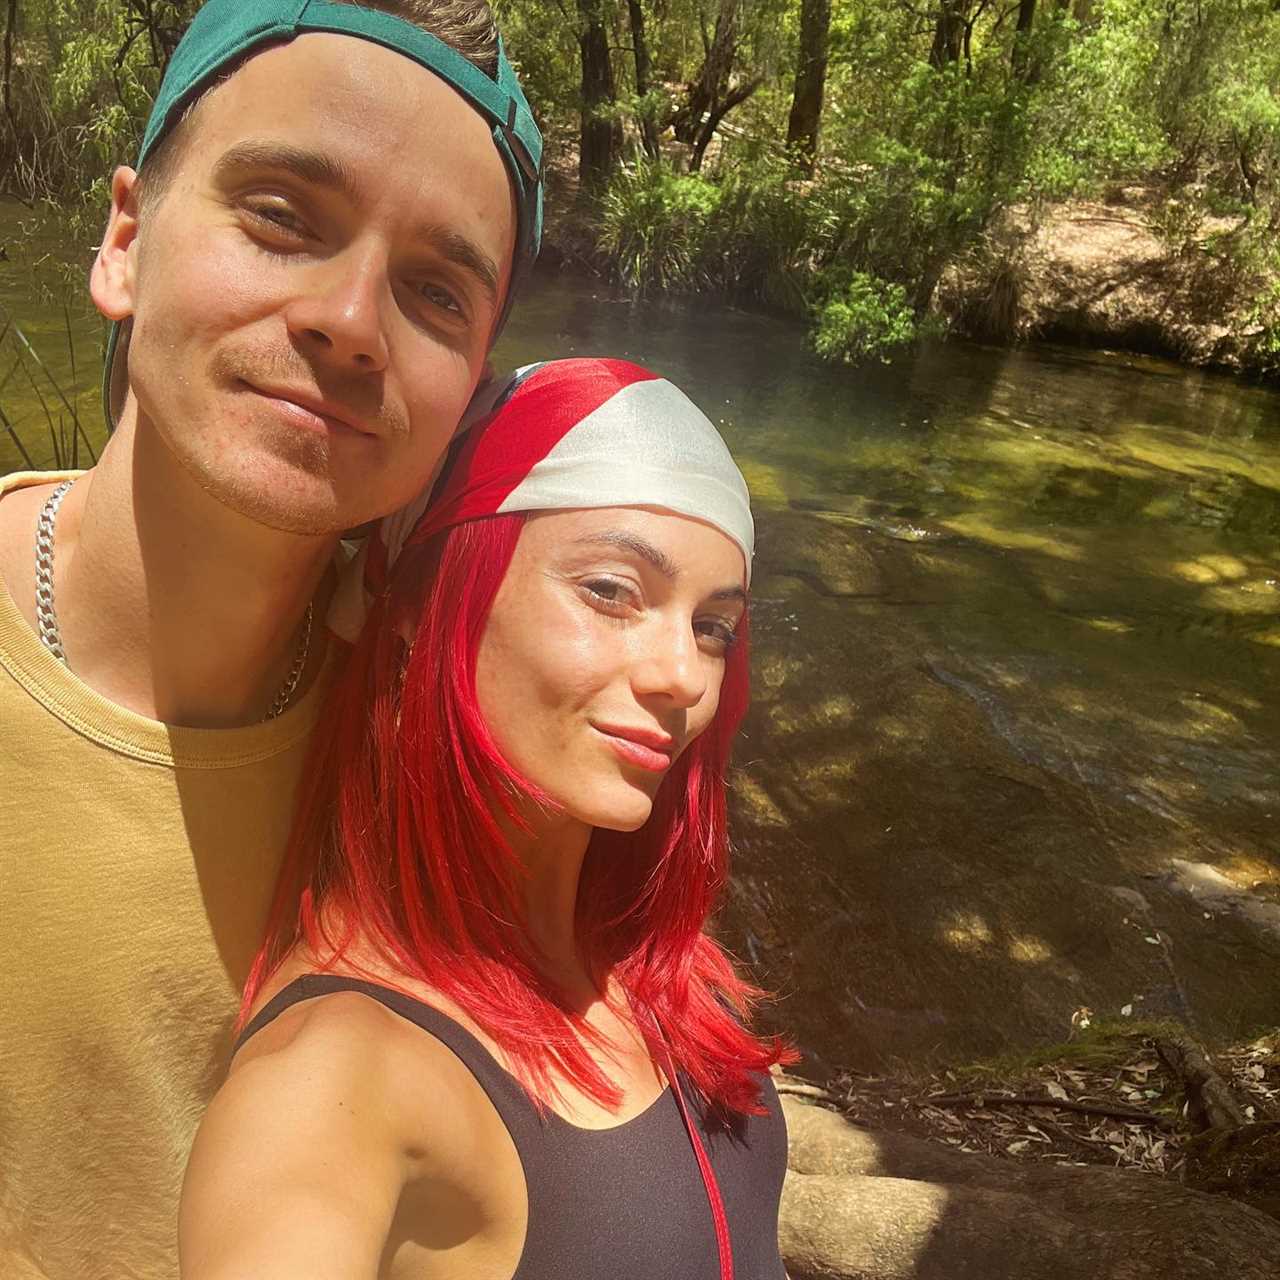 Strictly’s Dianne Buswell stuns fans with beach photo